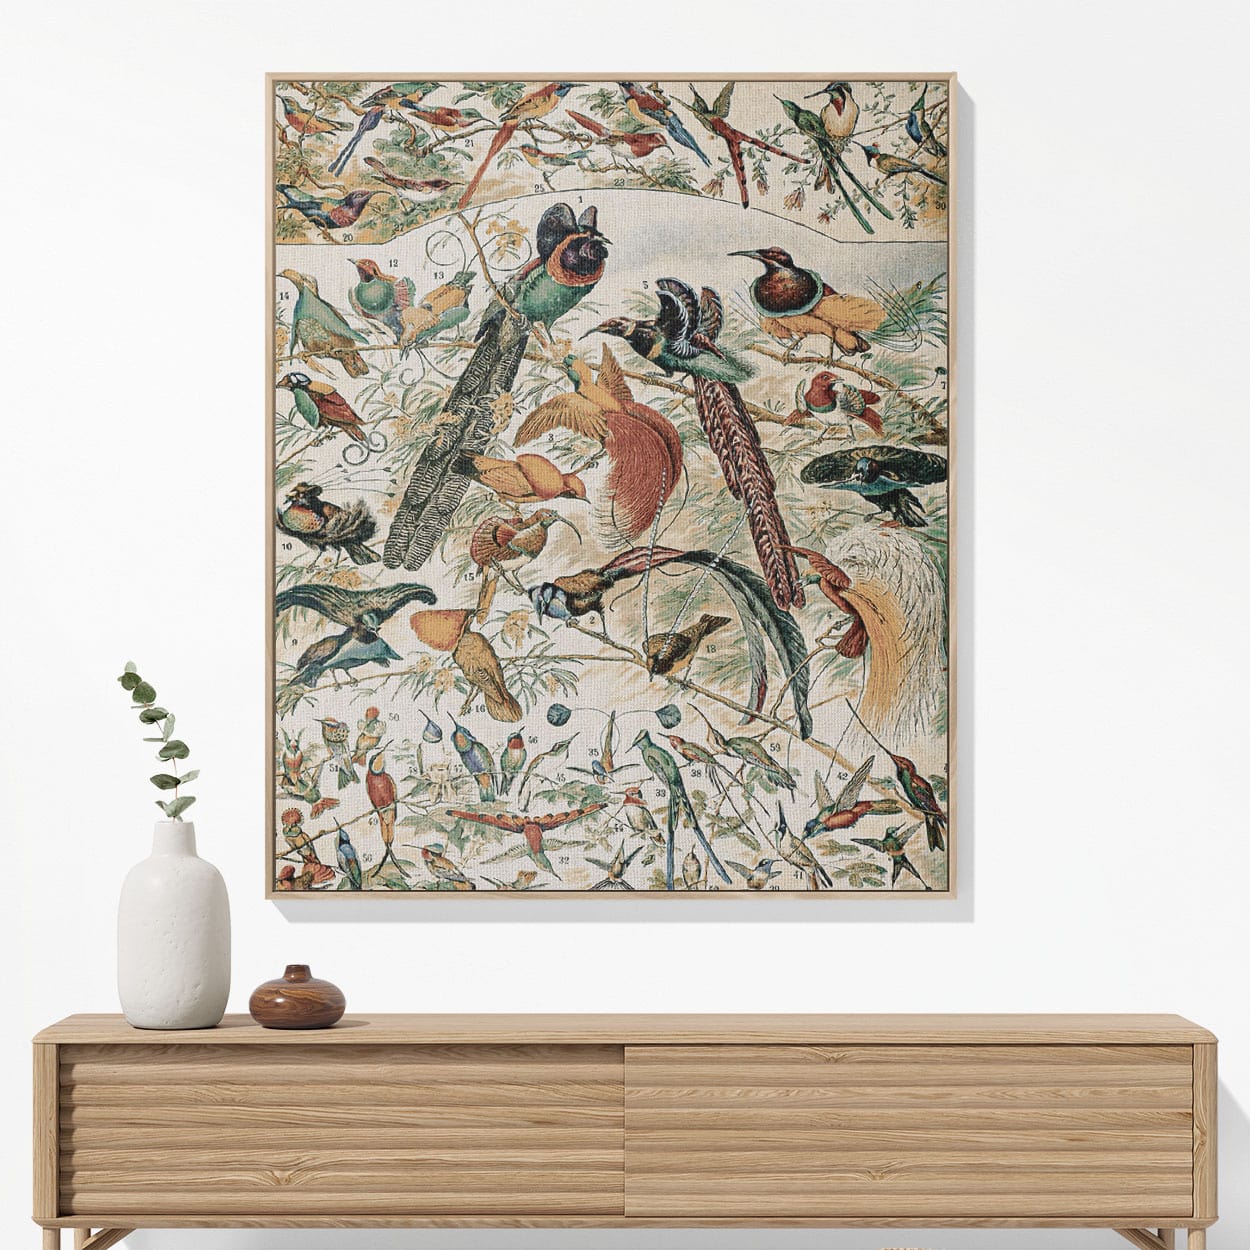 Collection of Birds Woven Blanket Woven Blanket Hanging on a Wall as Framed Wall Art